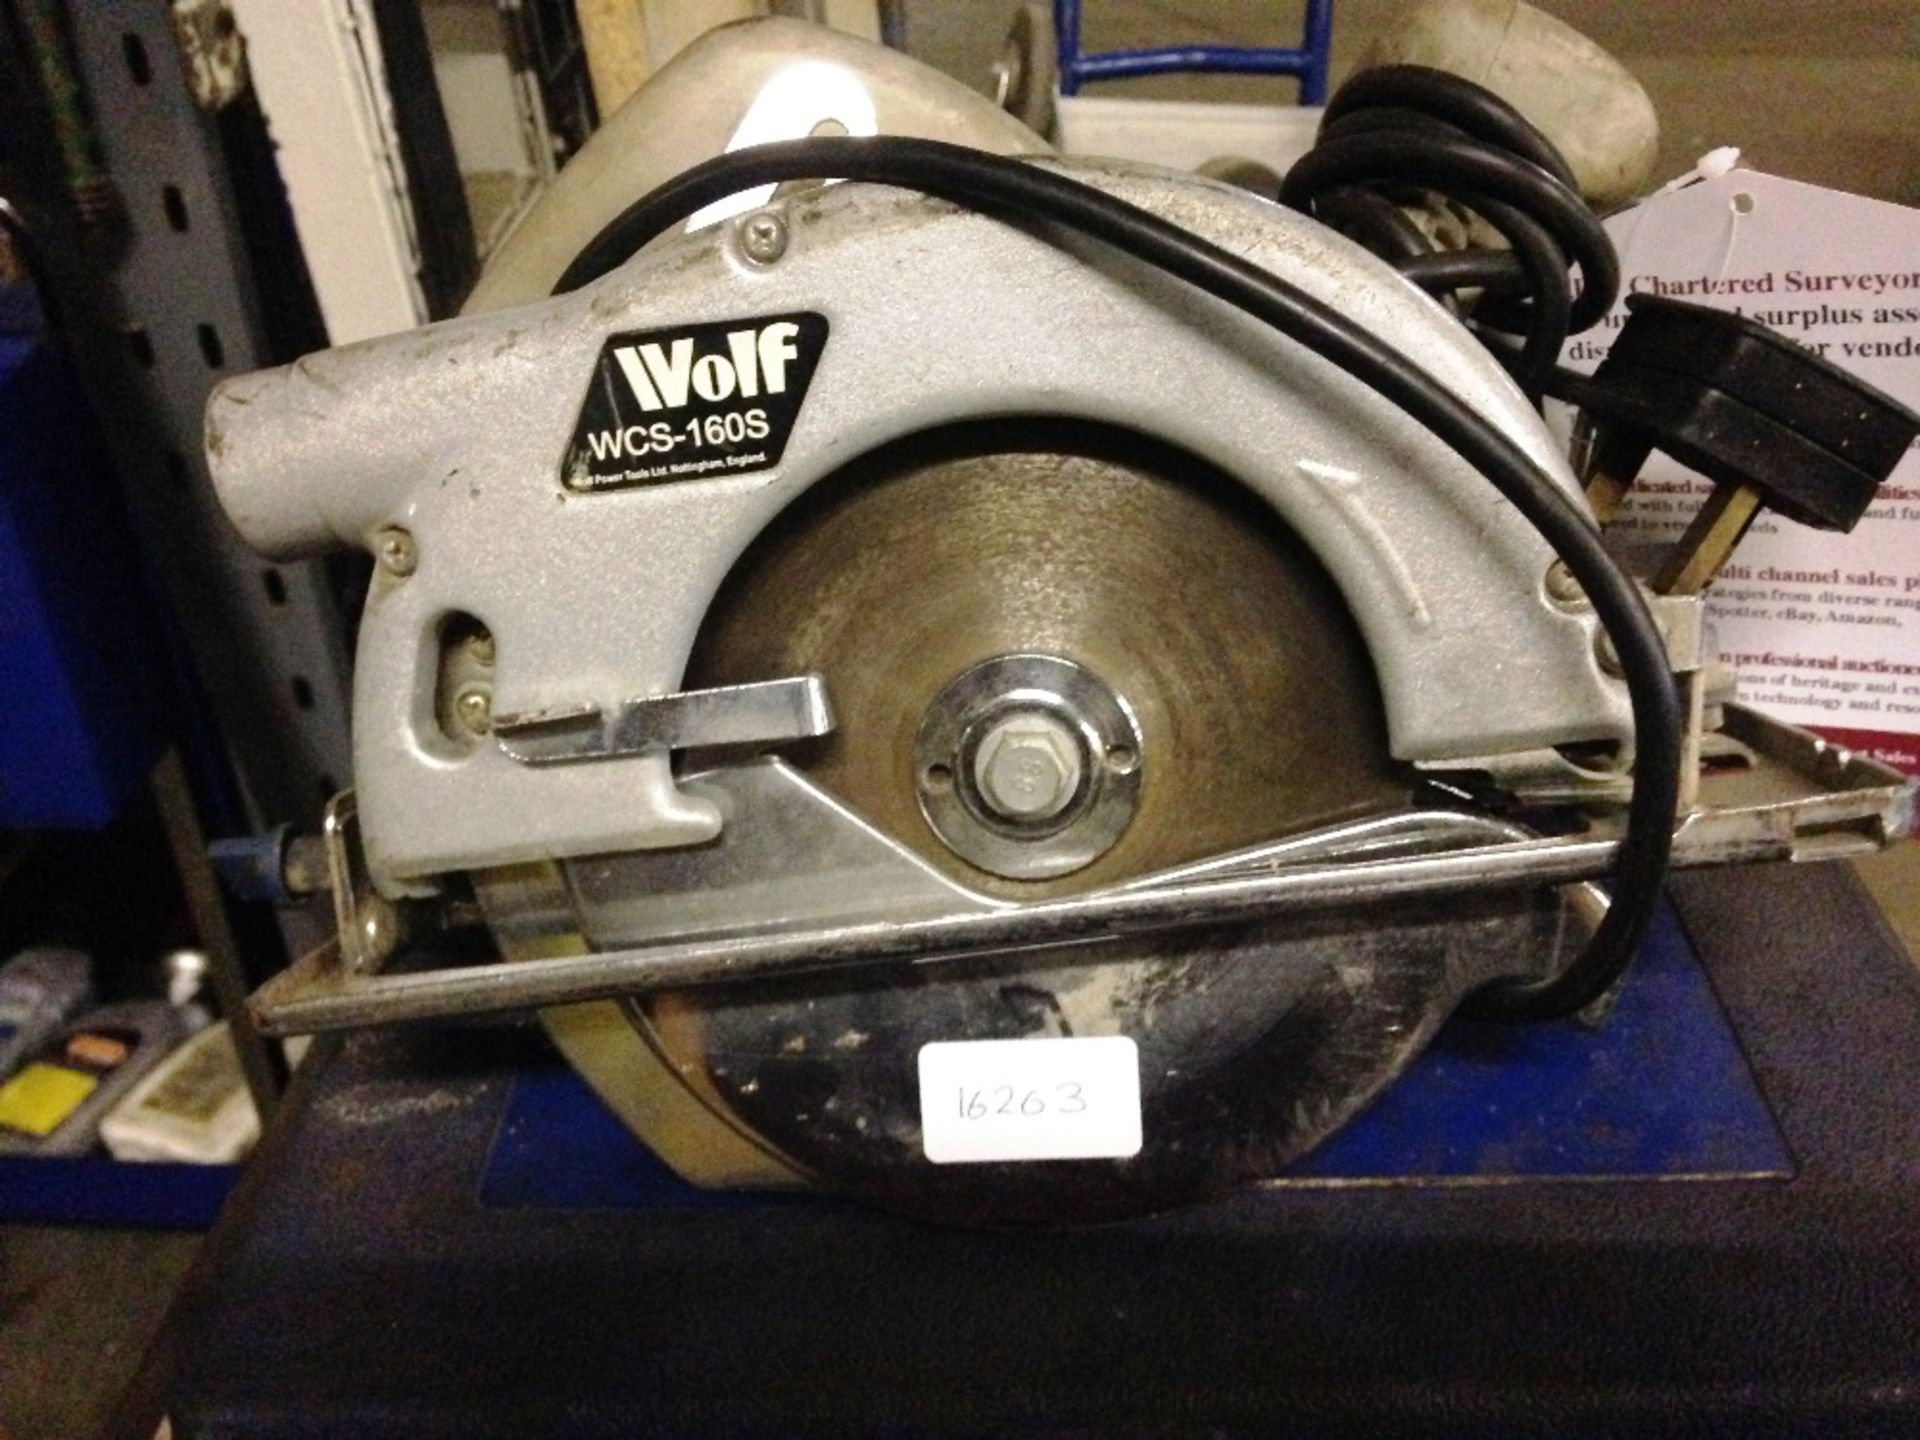 Wolf corded circular saw Model: WCS-160S